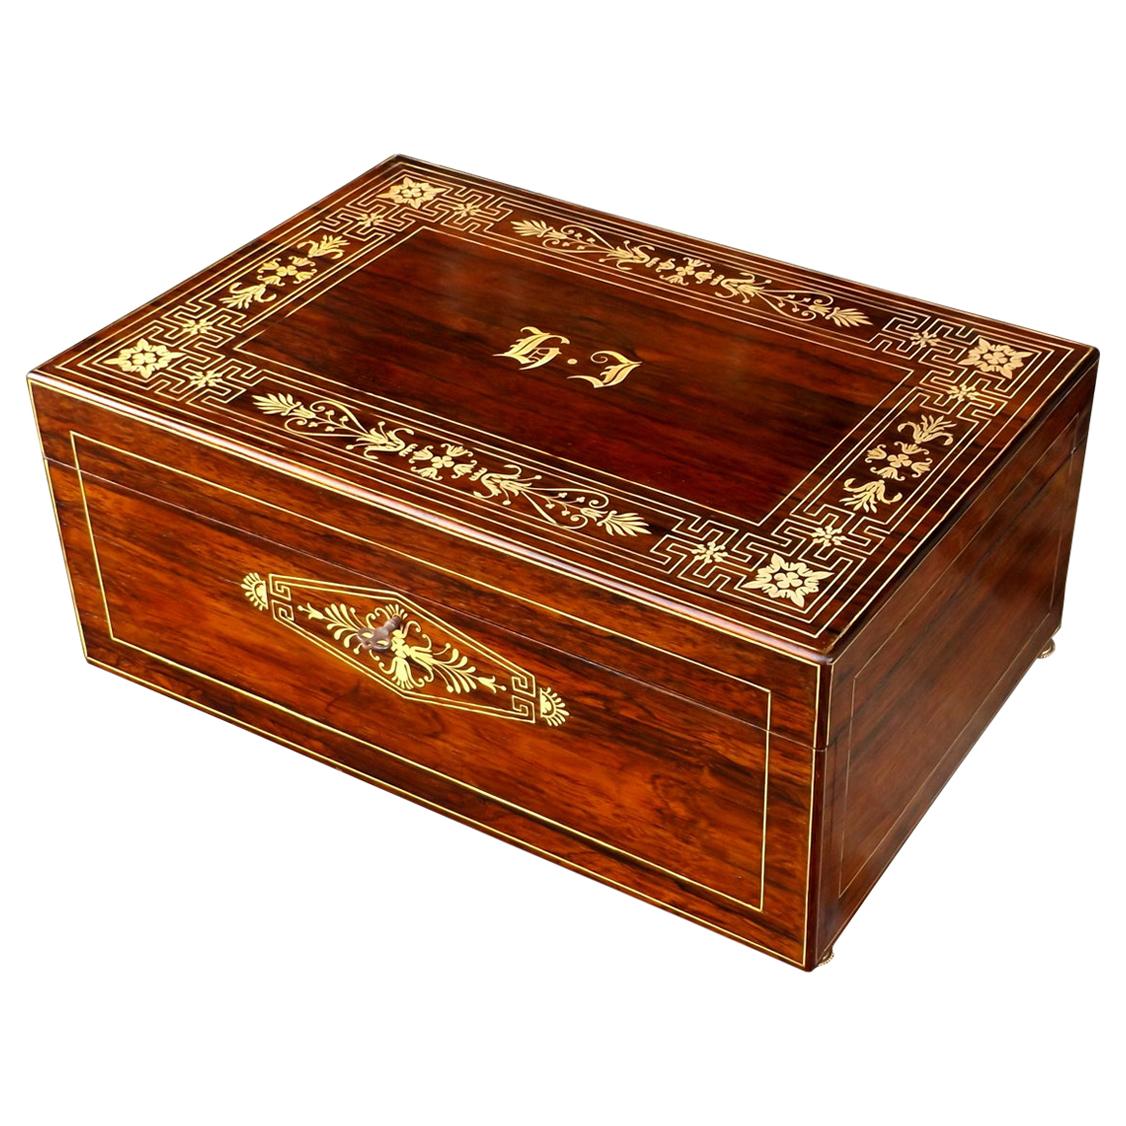 Antique French Mahogany Brass Inlaid Jewelry Casket Box Tahan Paris 19th Century For Sale